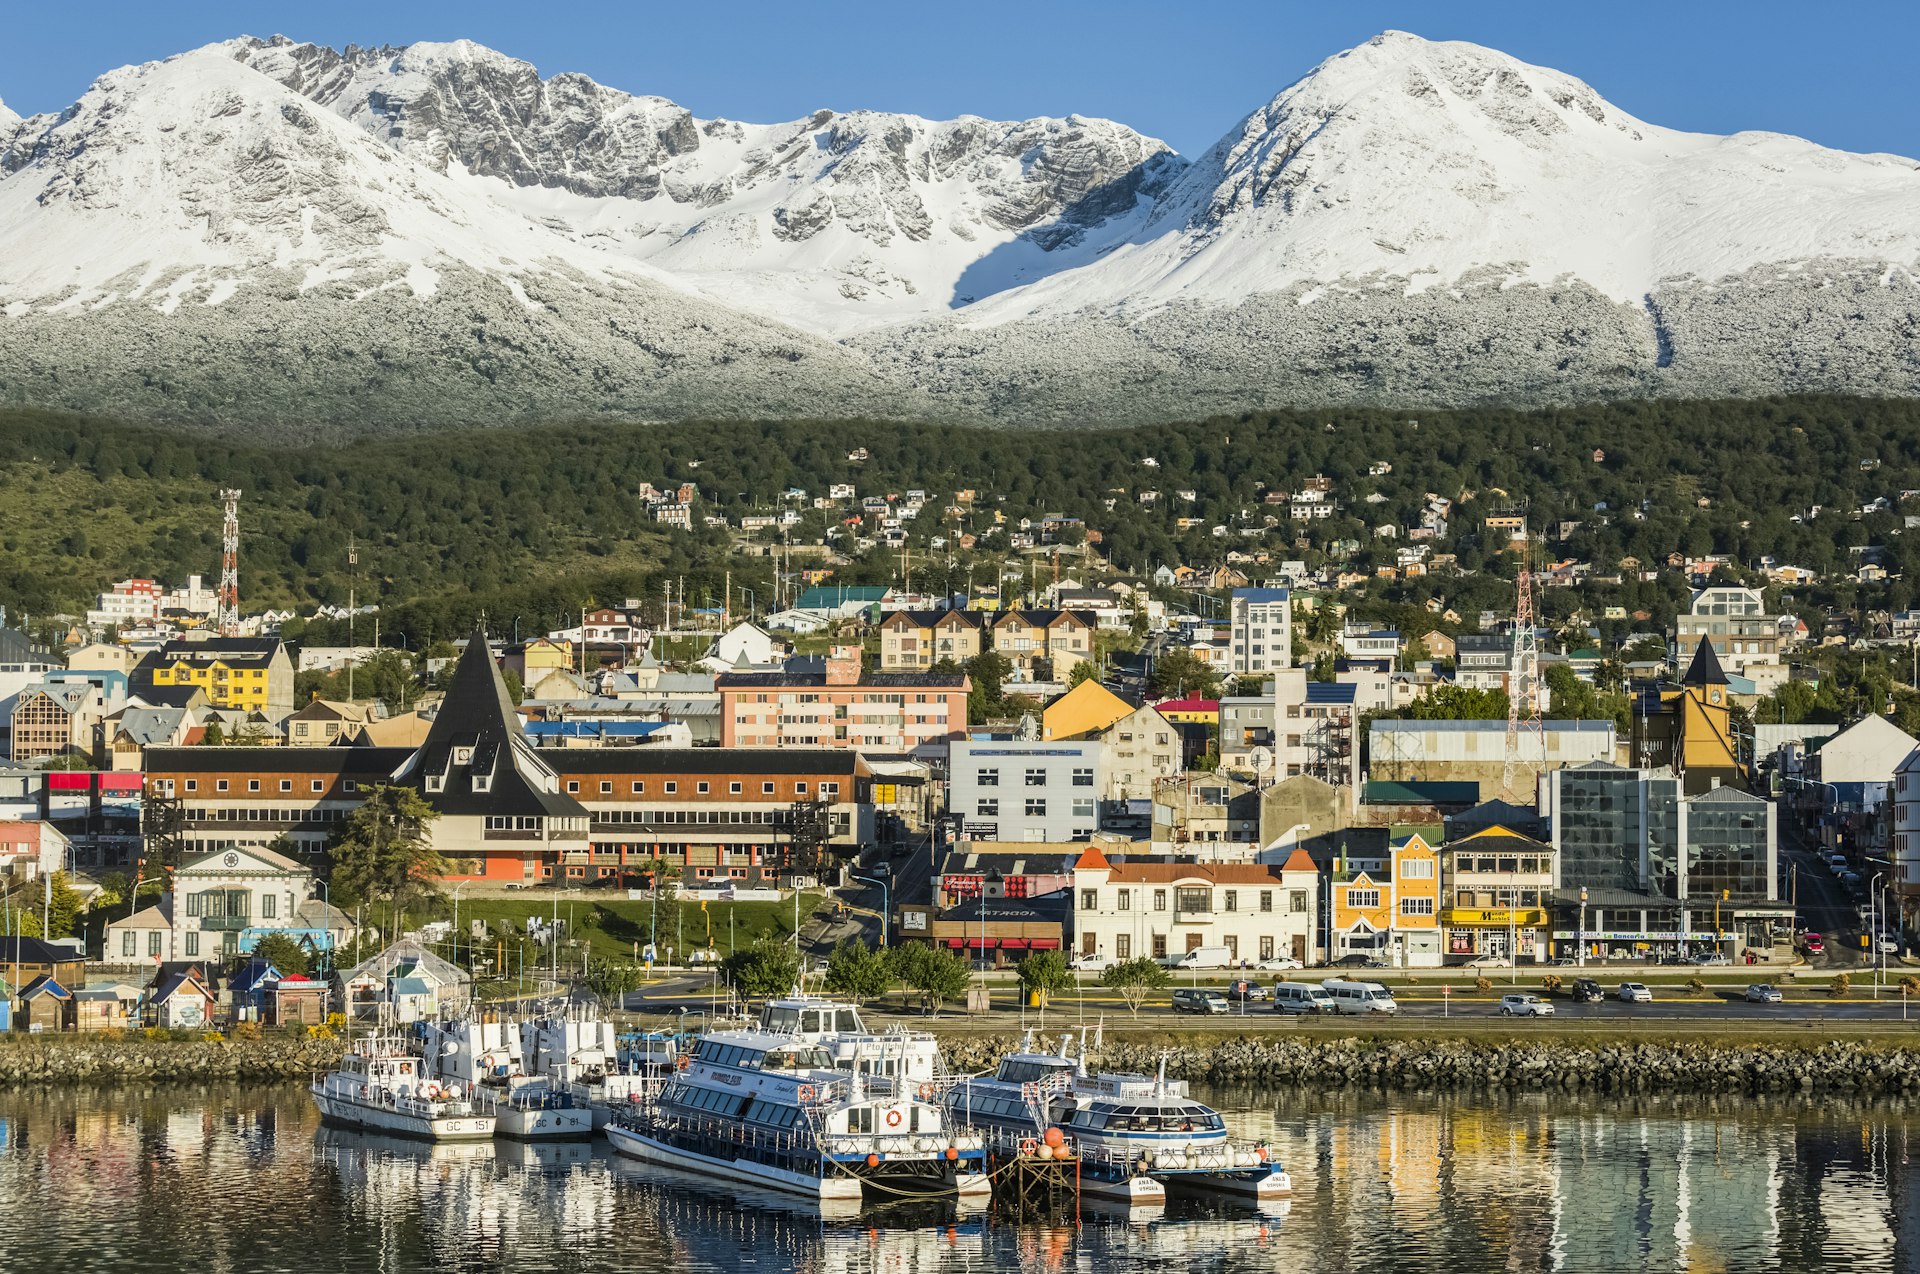 View of the port town of Ushuaia in Tierra del Fuego